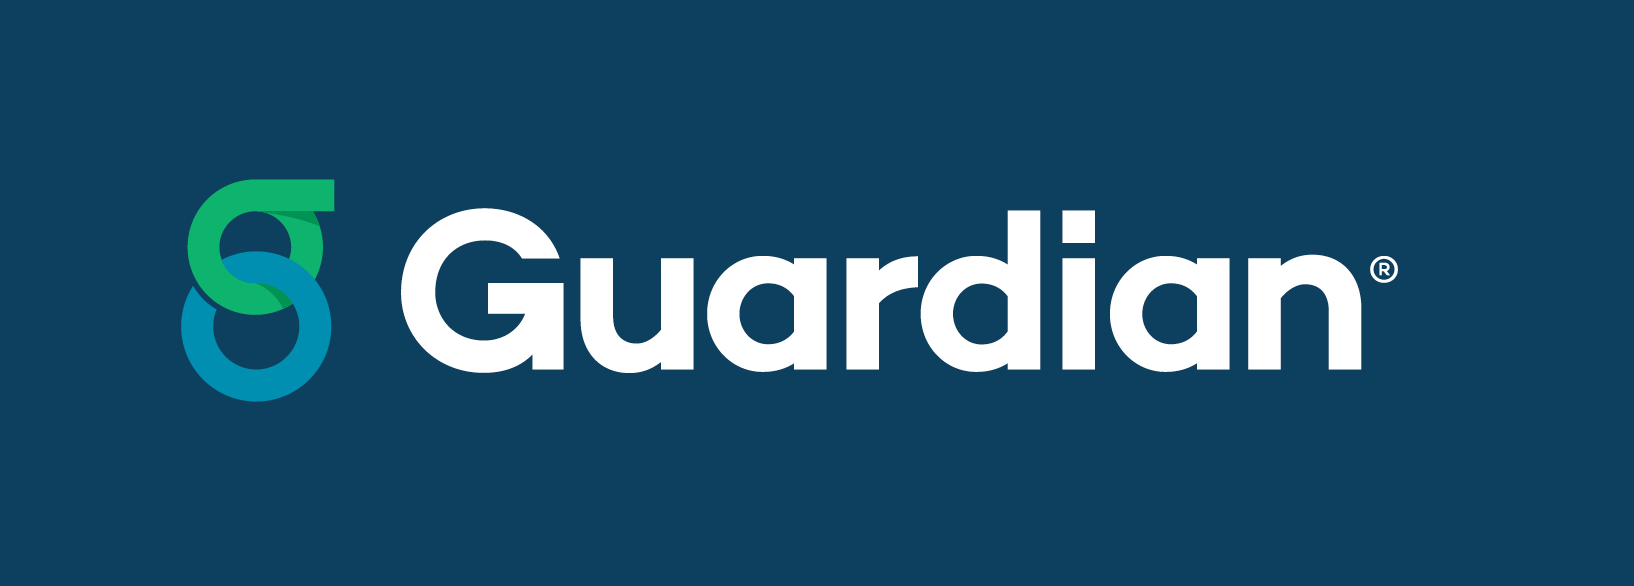 Guardian Logo - Brand New: New Logo and Identity for Guardian by The Working Assembly